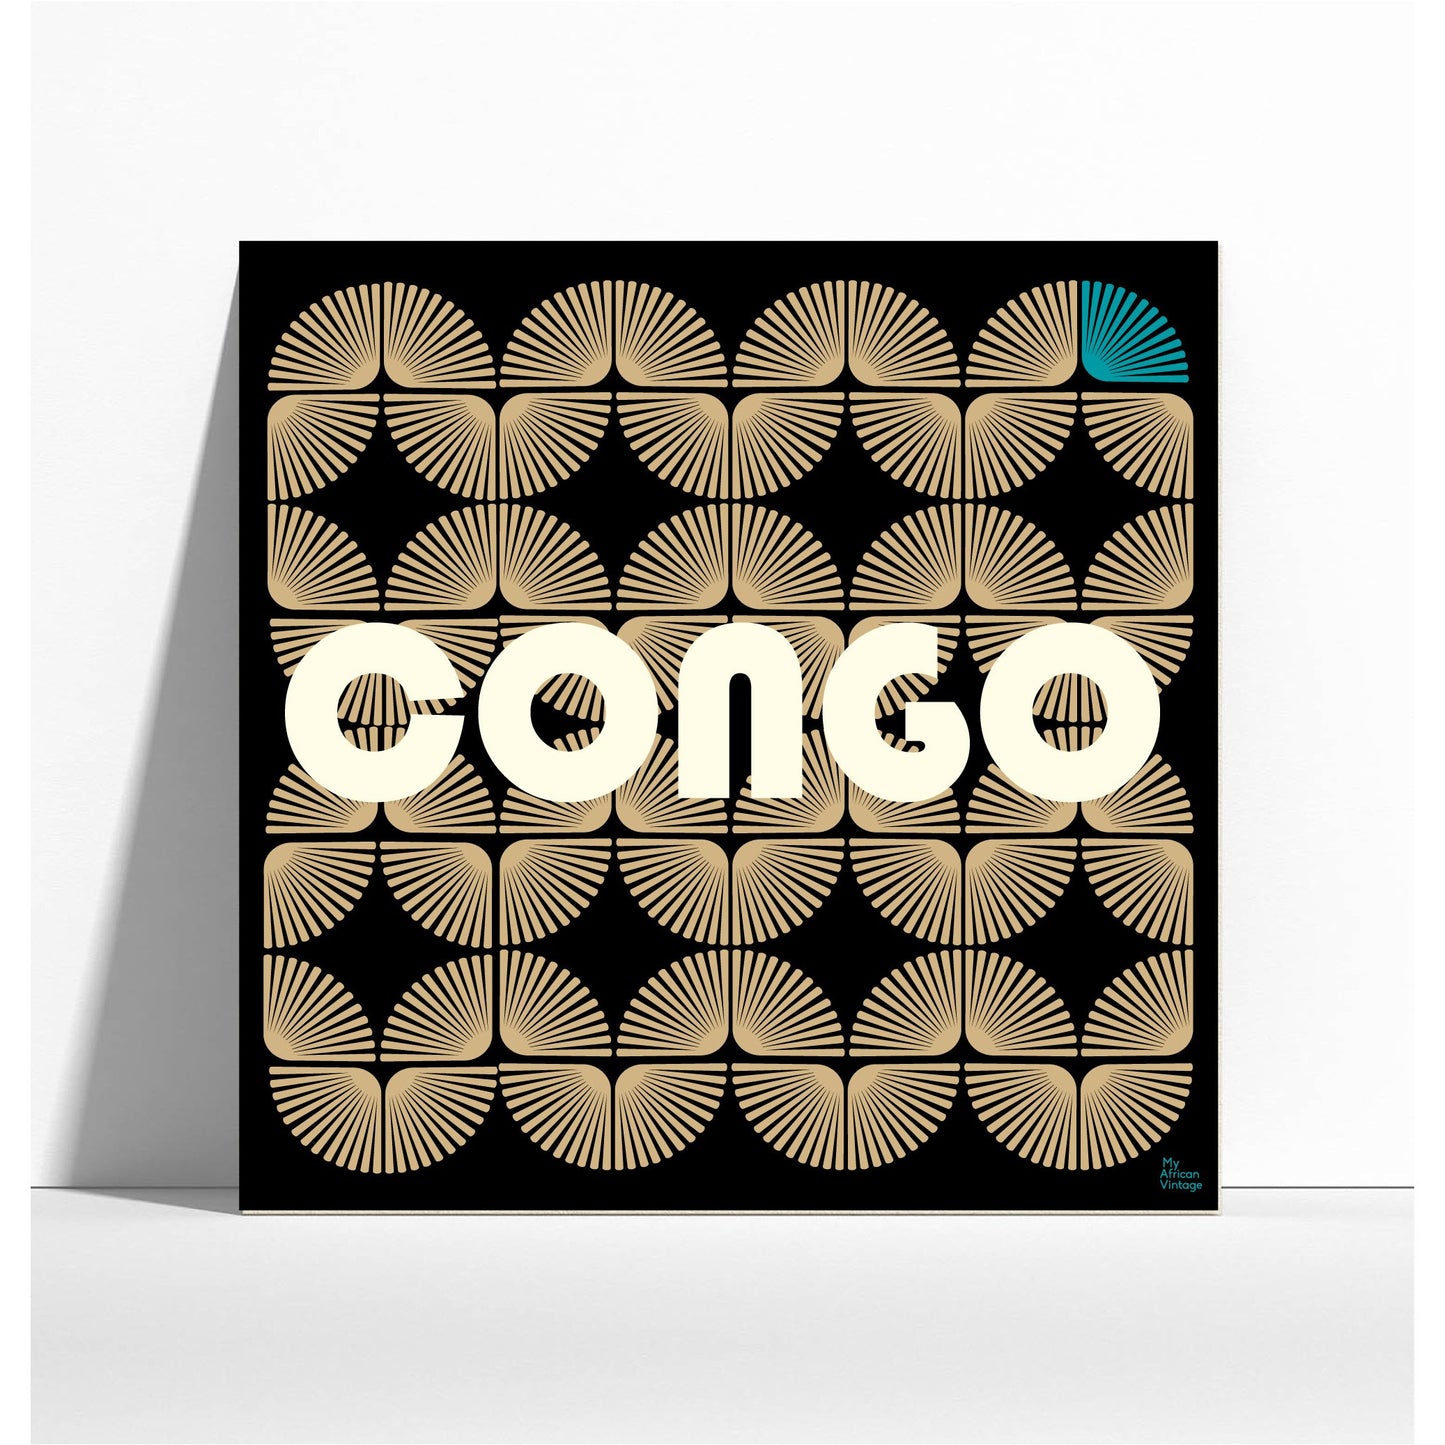 "Congo" retro style poster - "My Africa Vintage" collection